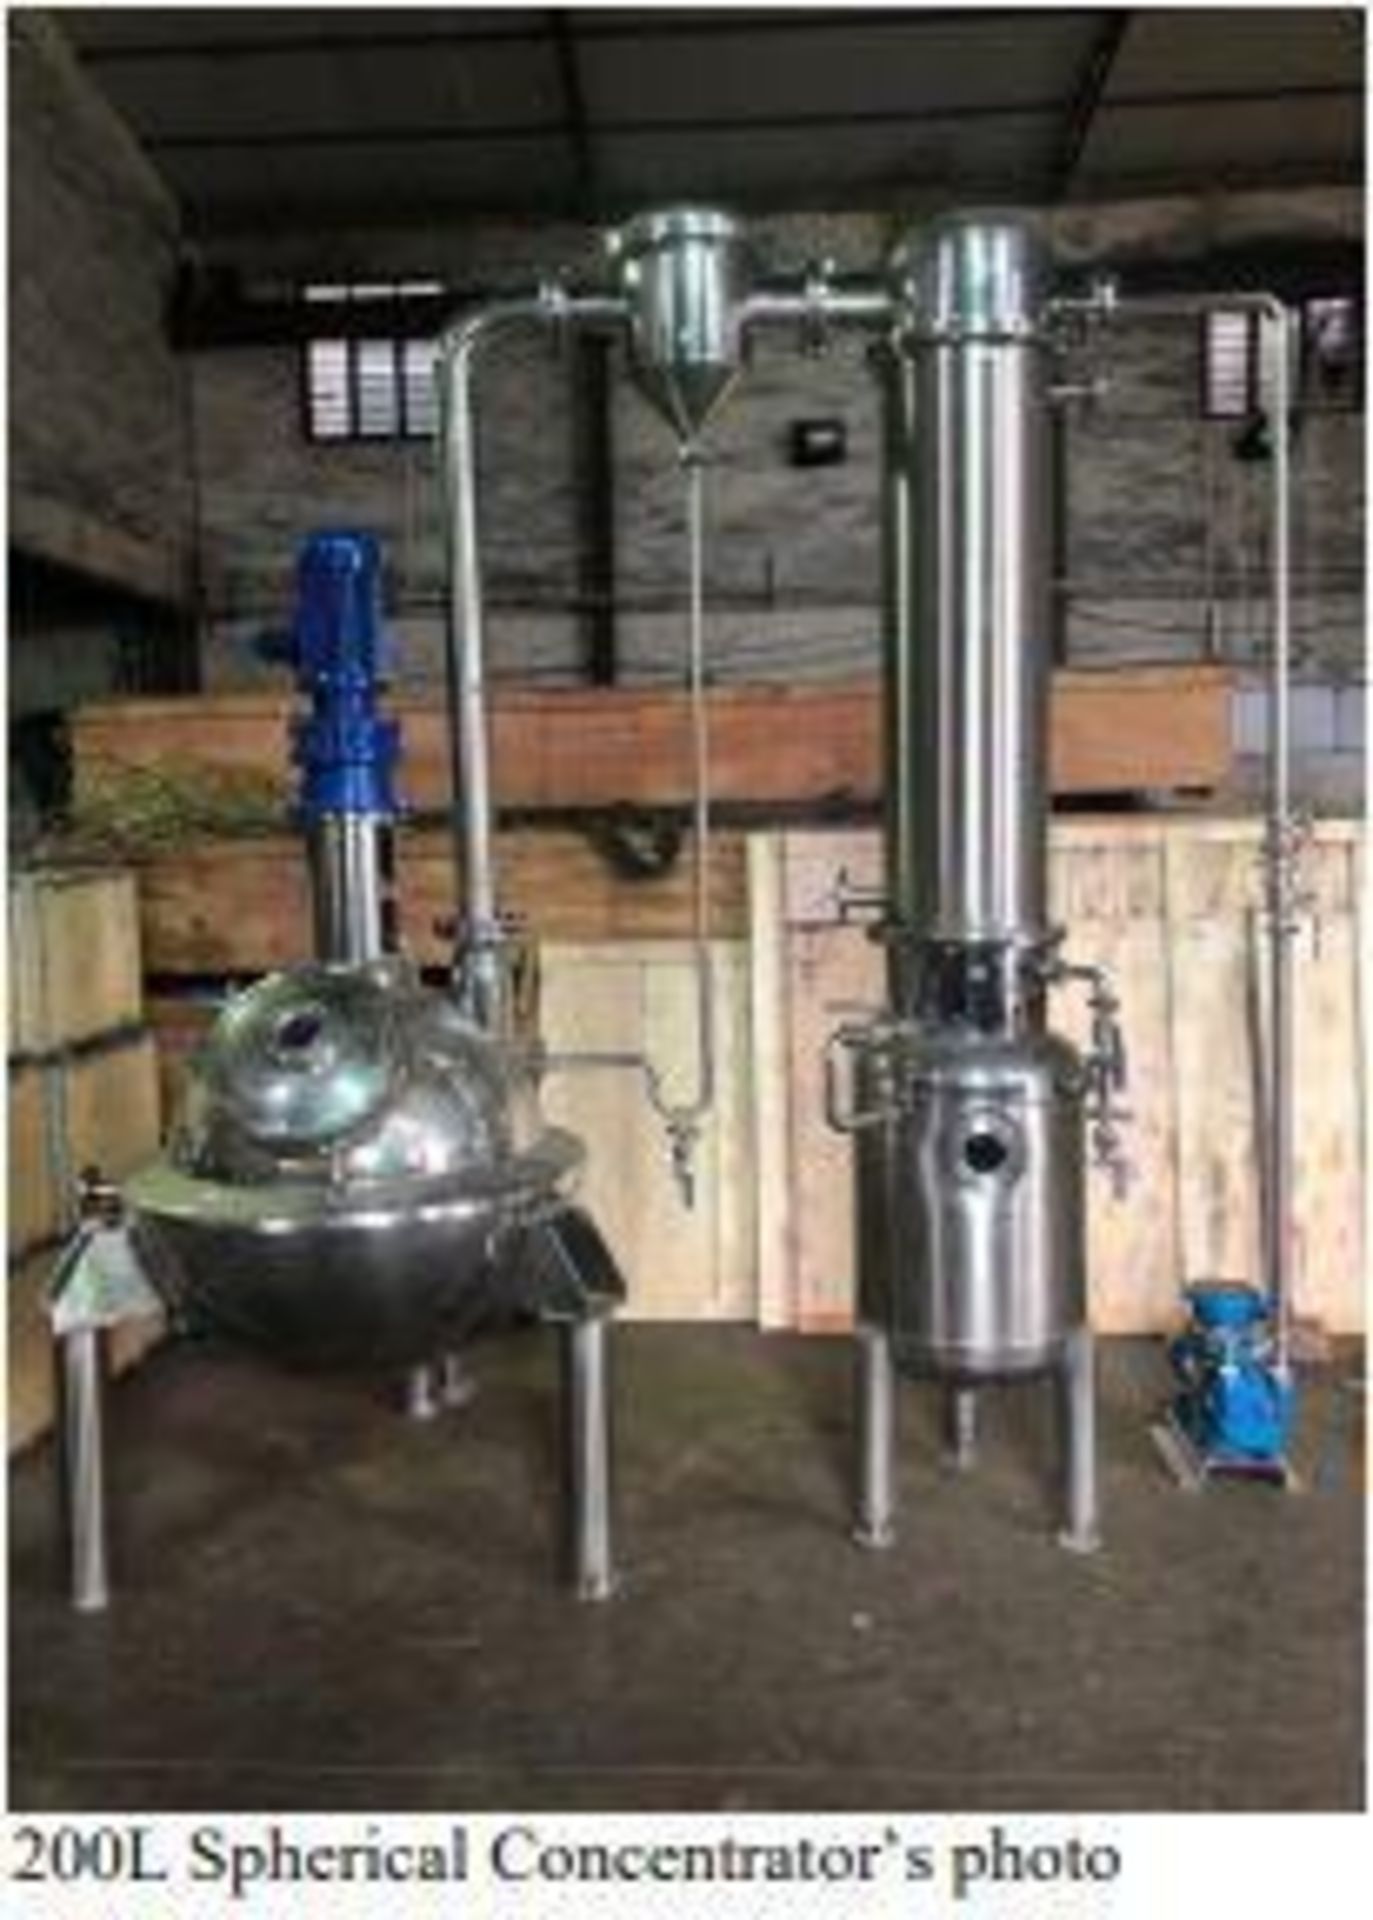 USA Lab Stainless Steel 120L Decarboxylation Sphere with In-line Cold Trap and Condensing Tower with - Image 9 of 10